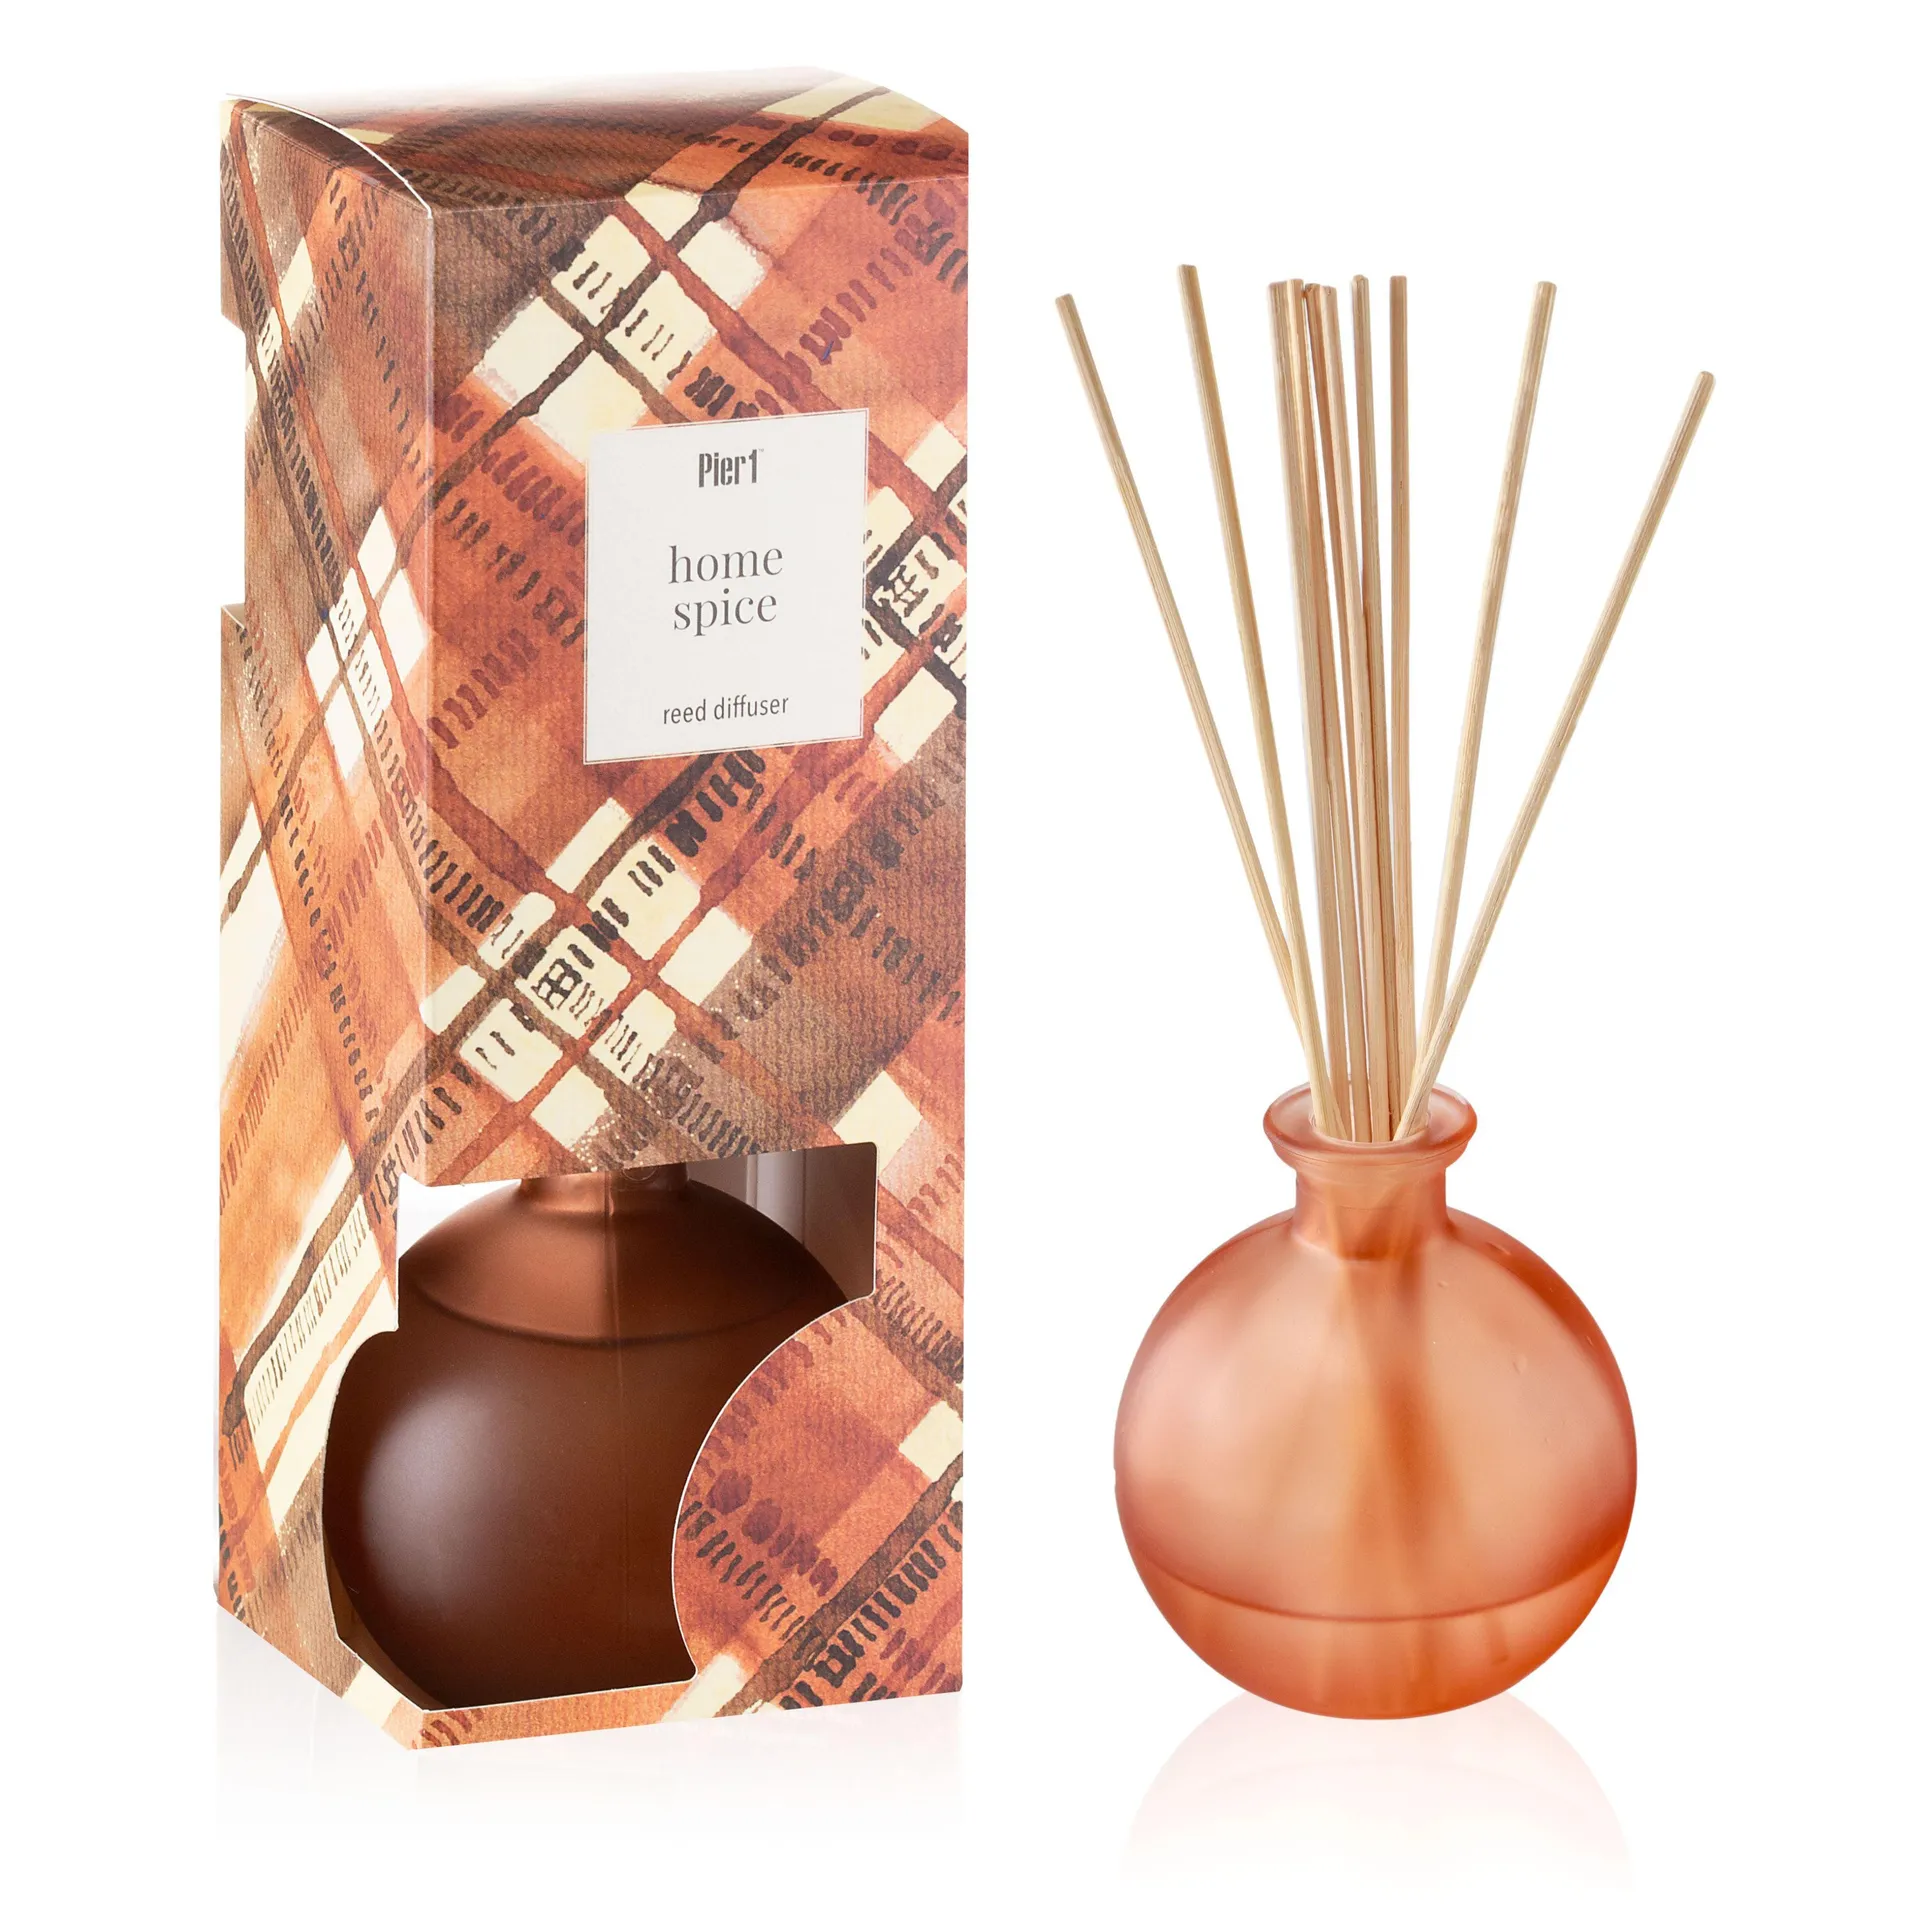 Pier 1 Home Spice 8oz Reed Diffuser